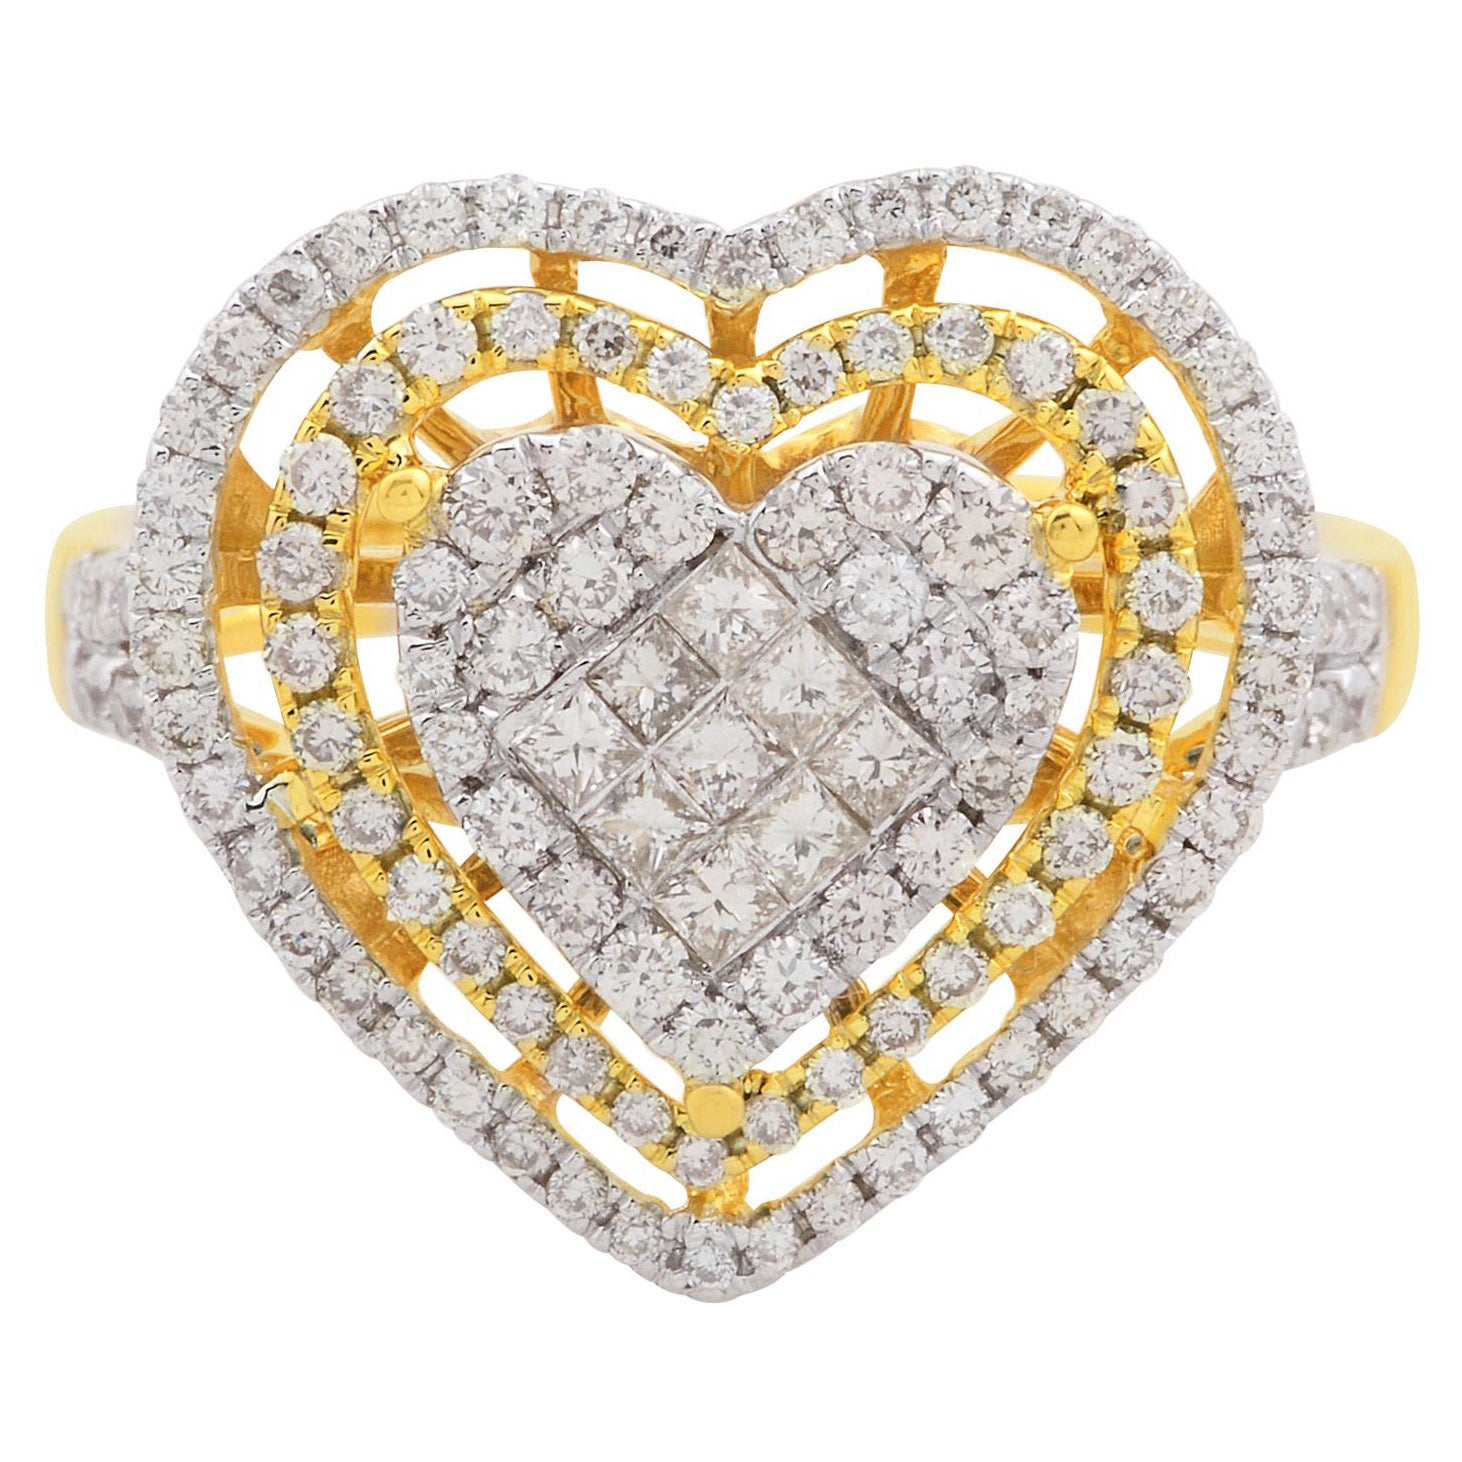 1.30 Carat SI Clarity HI Color Diamond Pave Heart Ring 18k Yellow Gold Jewelry